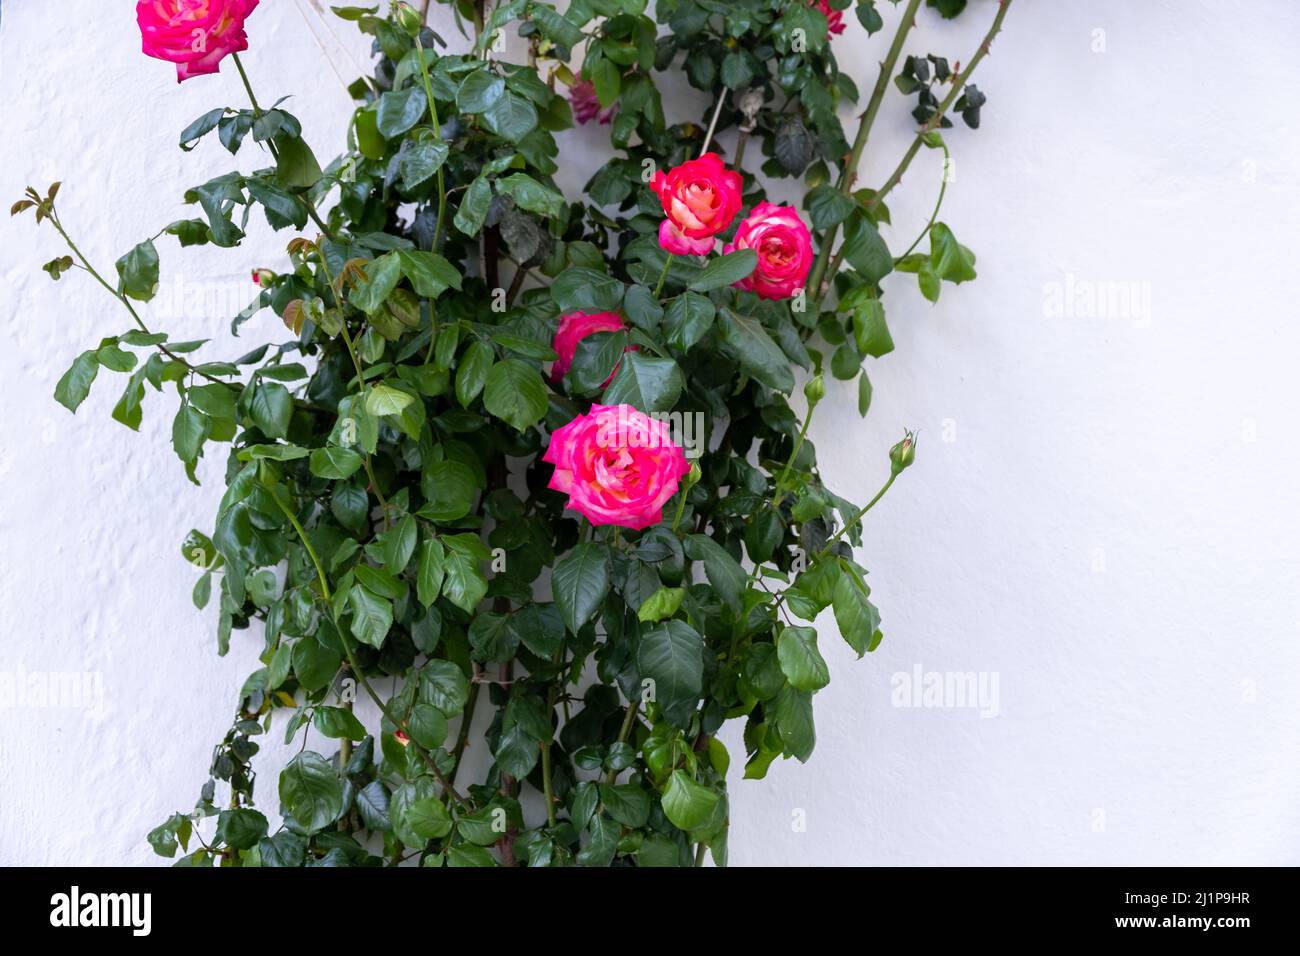 Climbing bright pink rose, ornamental thorny long lived and aromatic plant grows up on white wall background. Branch with lush green leaf, bud, fresh Stock Photo